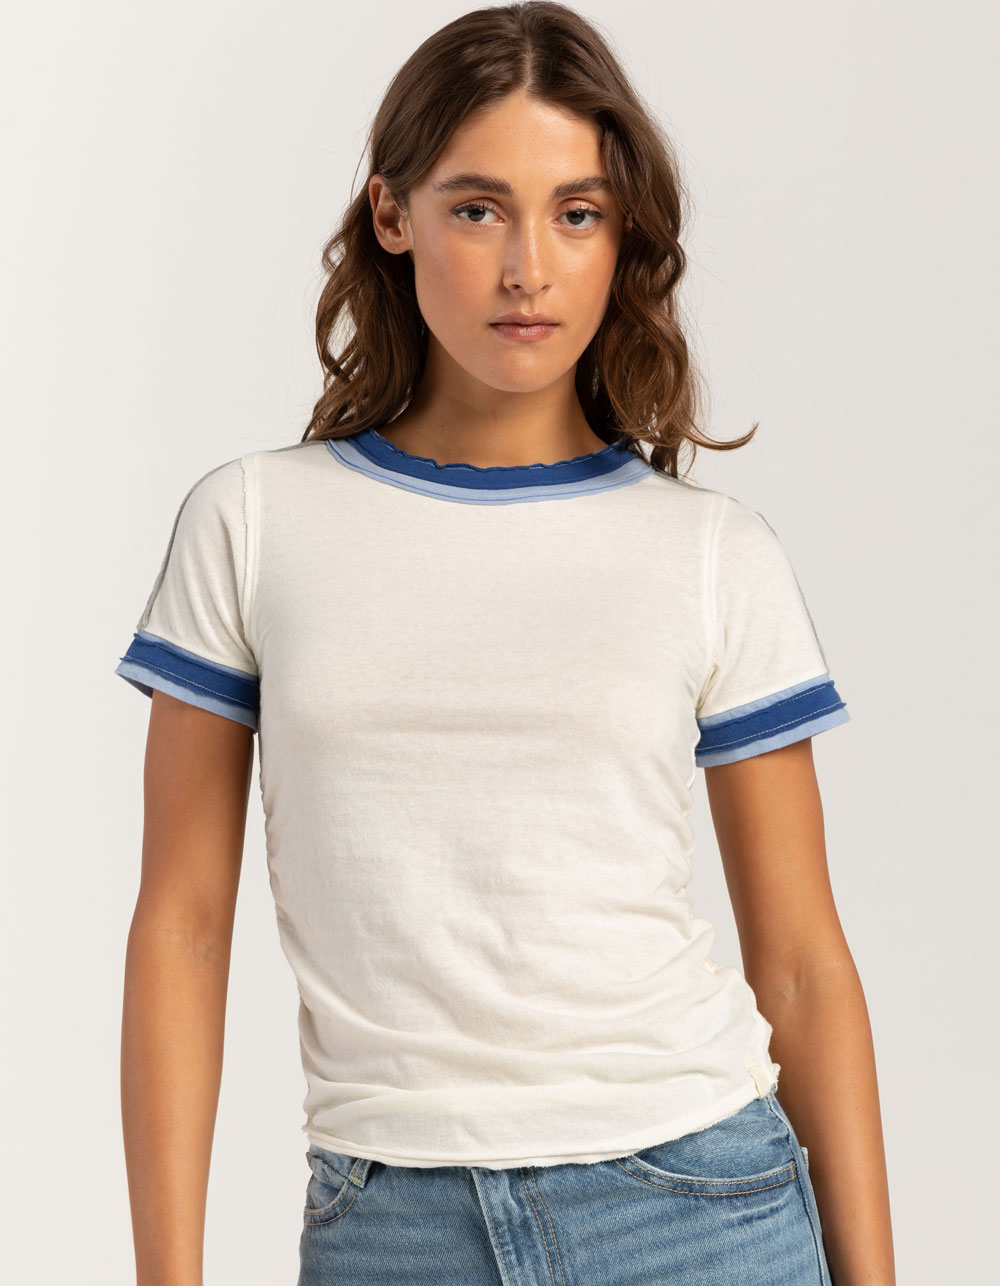 FREE PEOPLE Sporty Mix Womens Tee